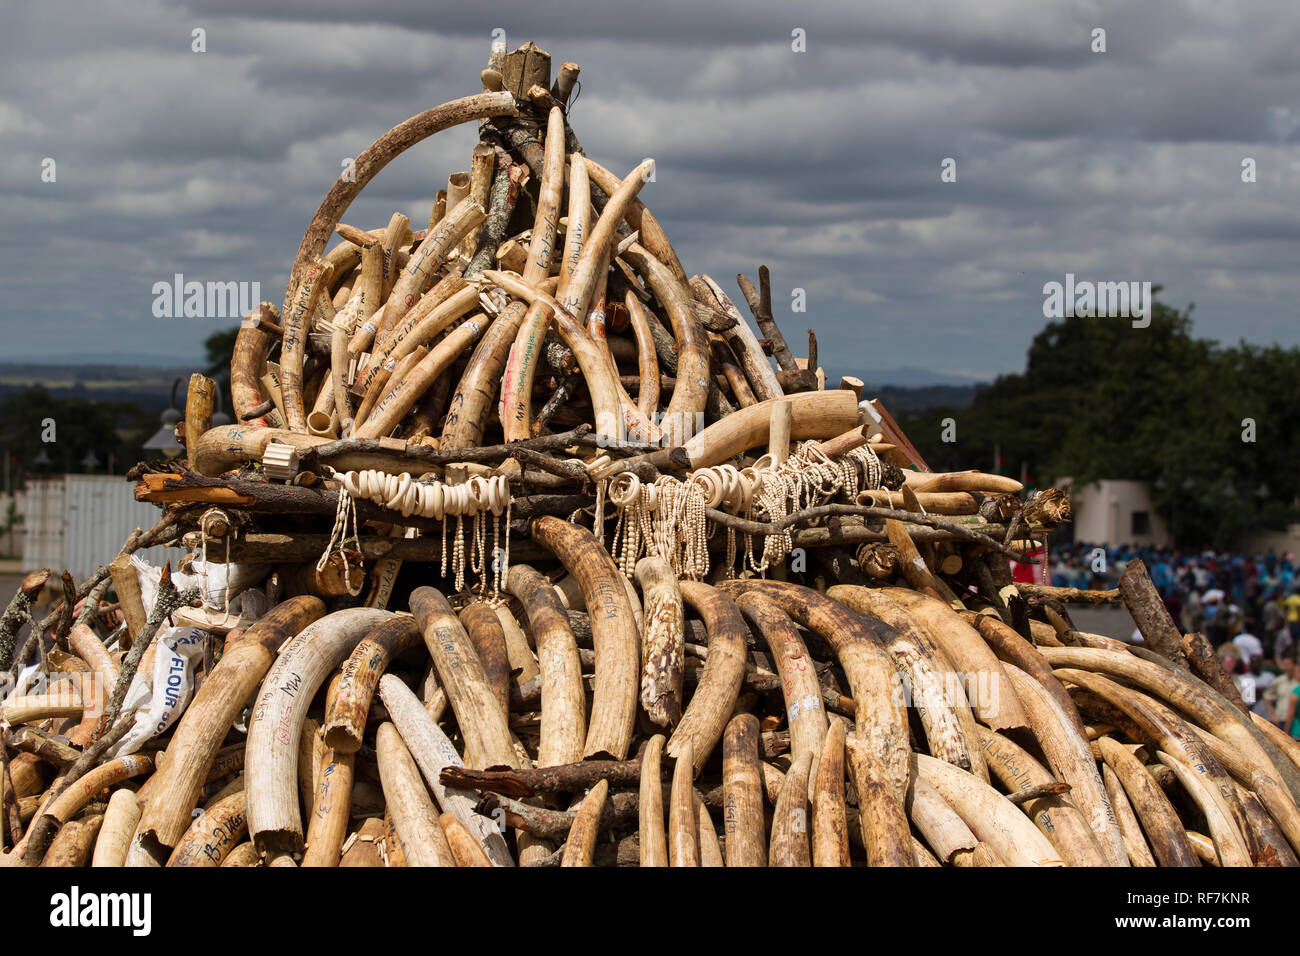 Confiscated elephant ivory is stacked in a pile to be burned in a ceremony against wildlife crime outside parliament in Lilongwe, Malawi Stock Photo